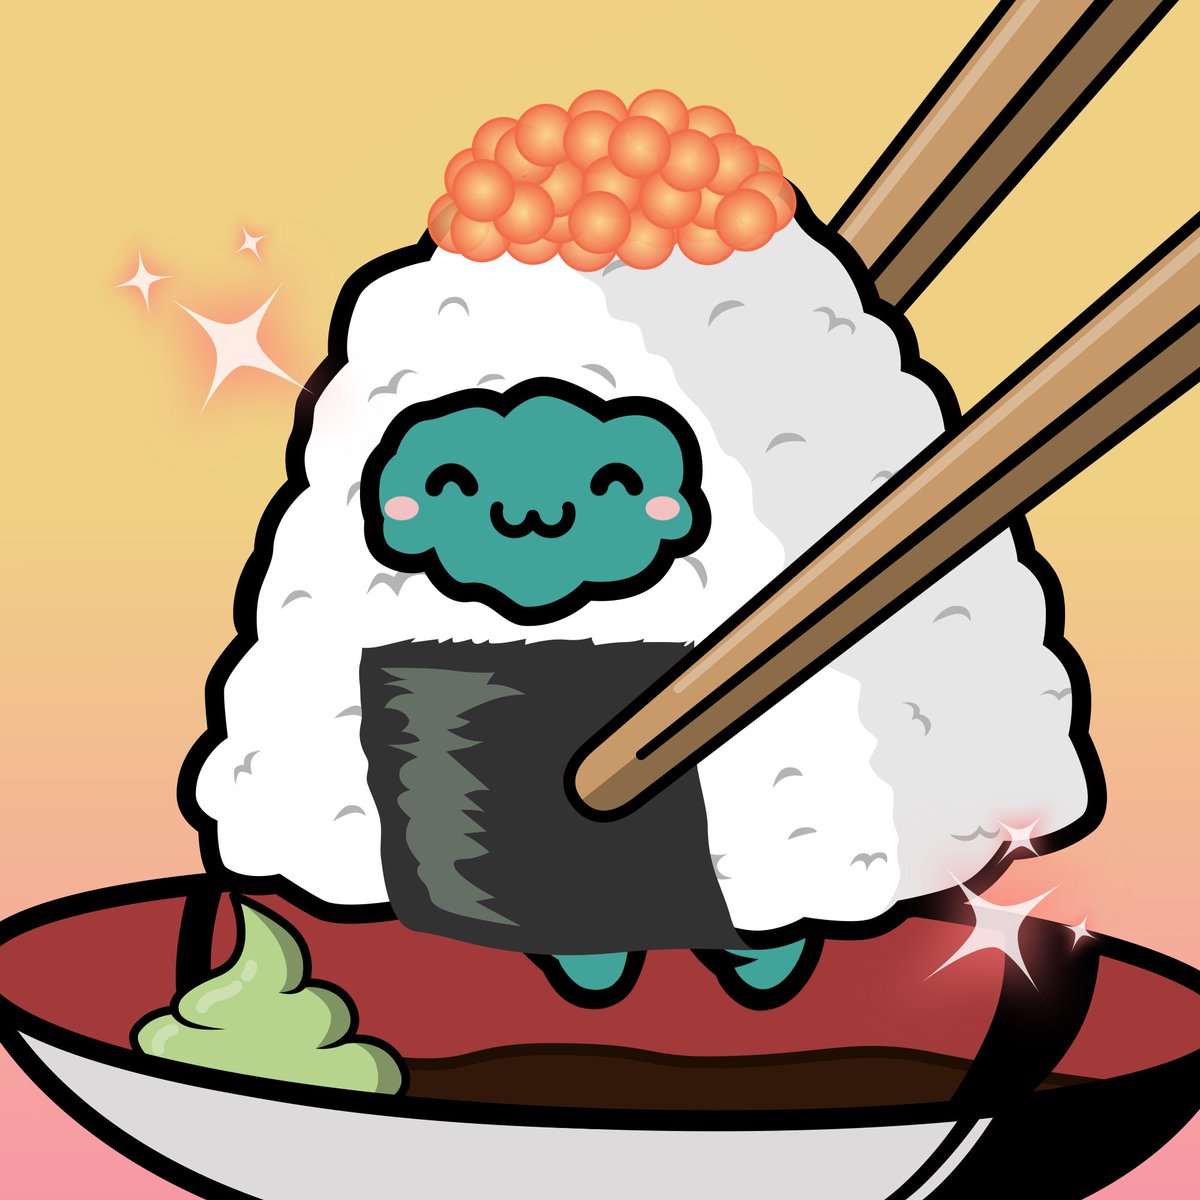 Happy Beanz Day everyone!!!
Because it’s HBD, AzuKitchen will serve some nice #foodporn to you🔥🫶🤤

On today’s menu: Onigiri #Beanz with mentaiko topping 🍣 

To taste a little bit of our edit specialty you can visit the #Azuki Discord Asset channel ⛩️🫘🪽🫶🔥